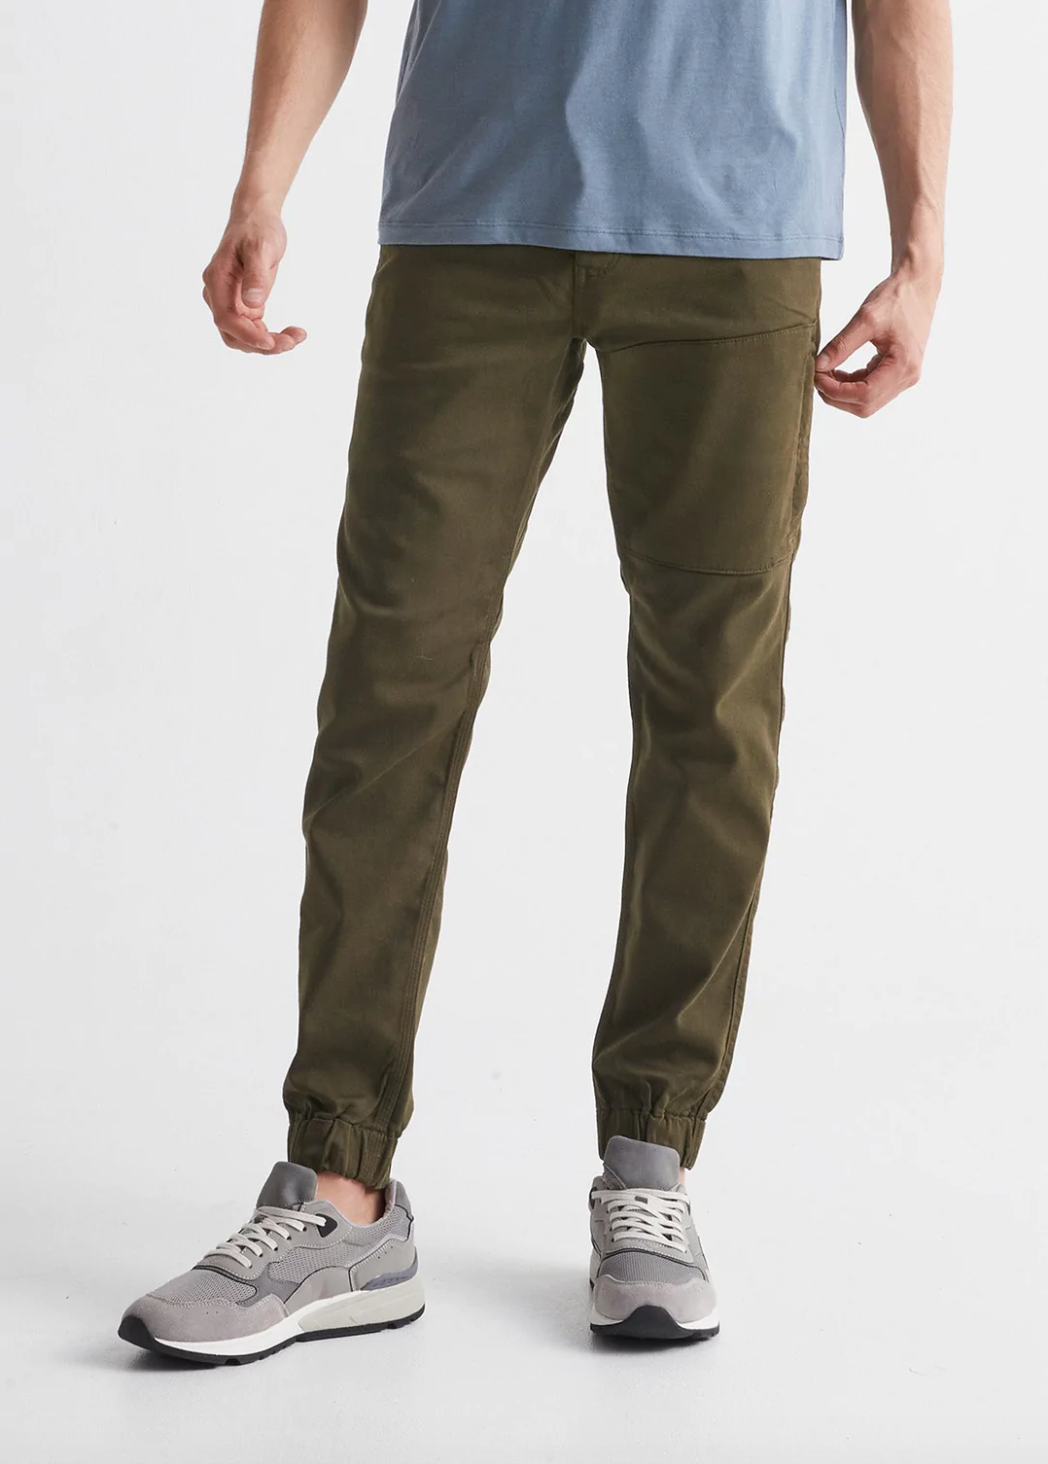 Duer- No Sweat Jogger Army Green